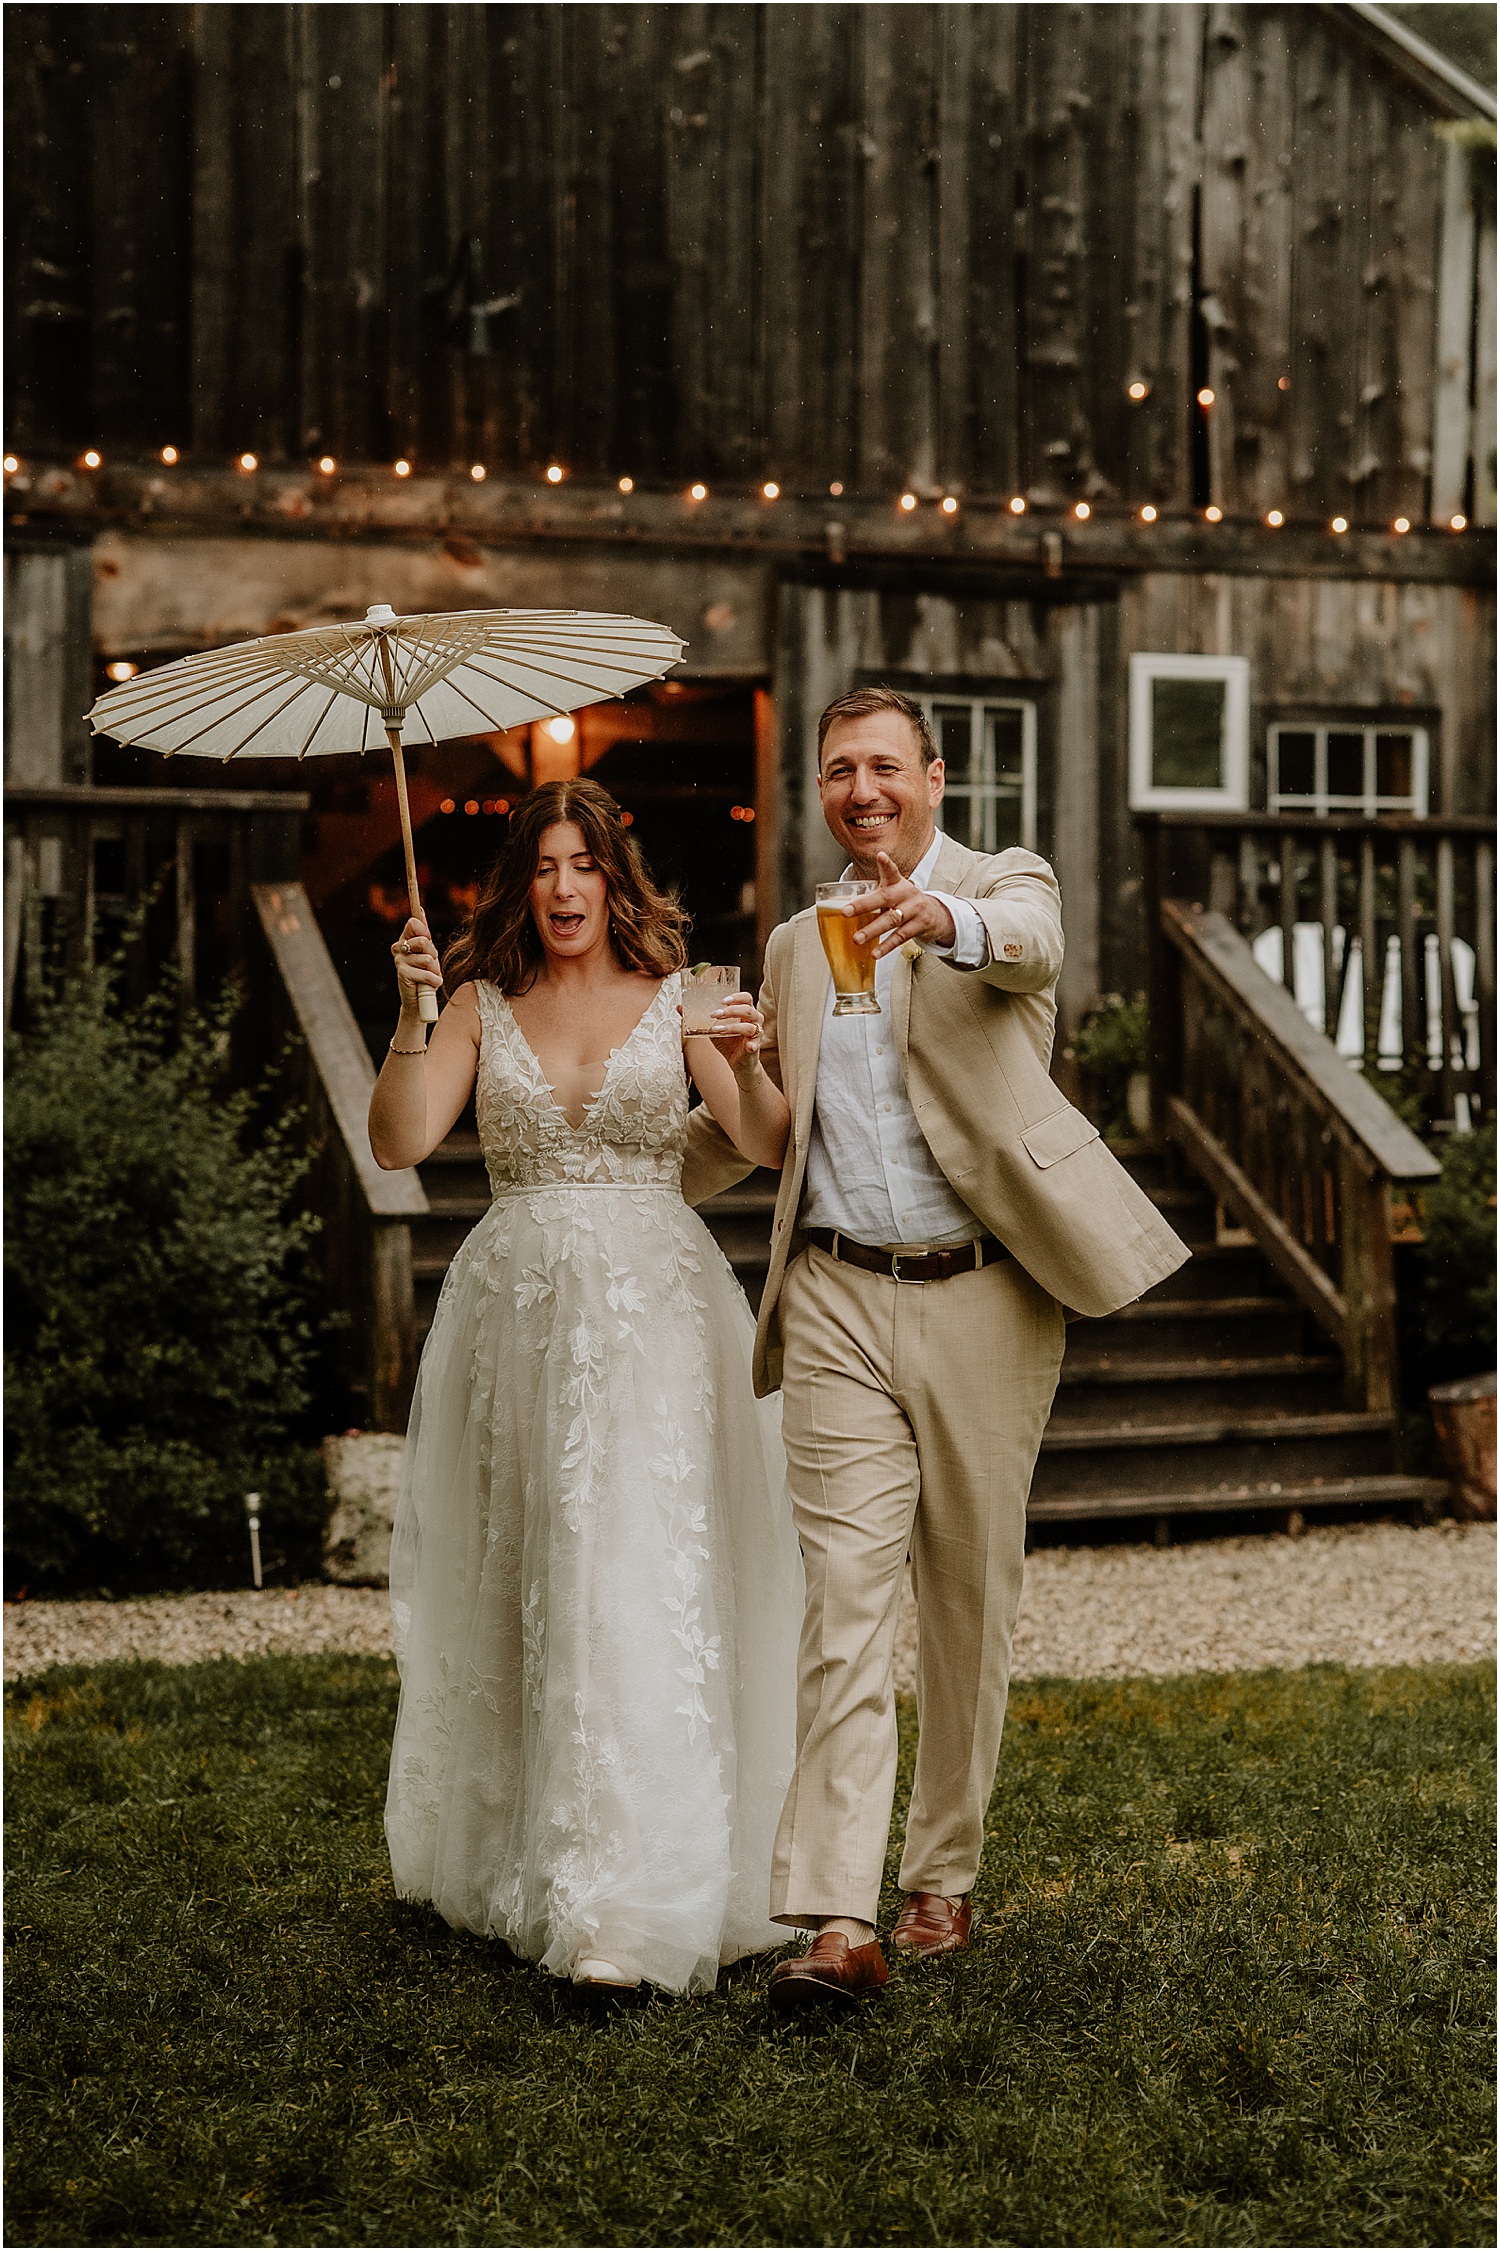 Happy couple together for Caswell Farm Wedding Photographer